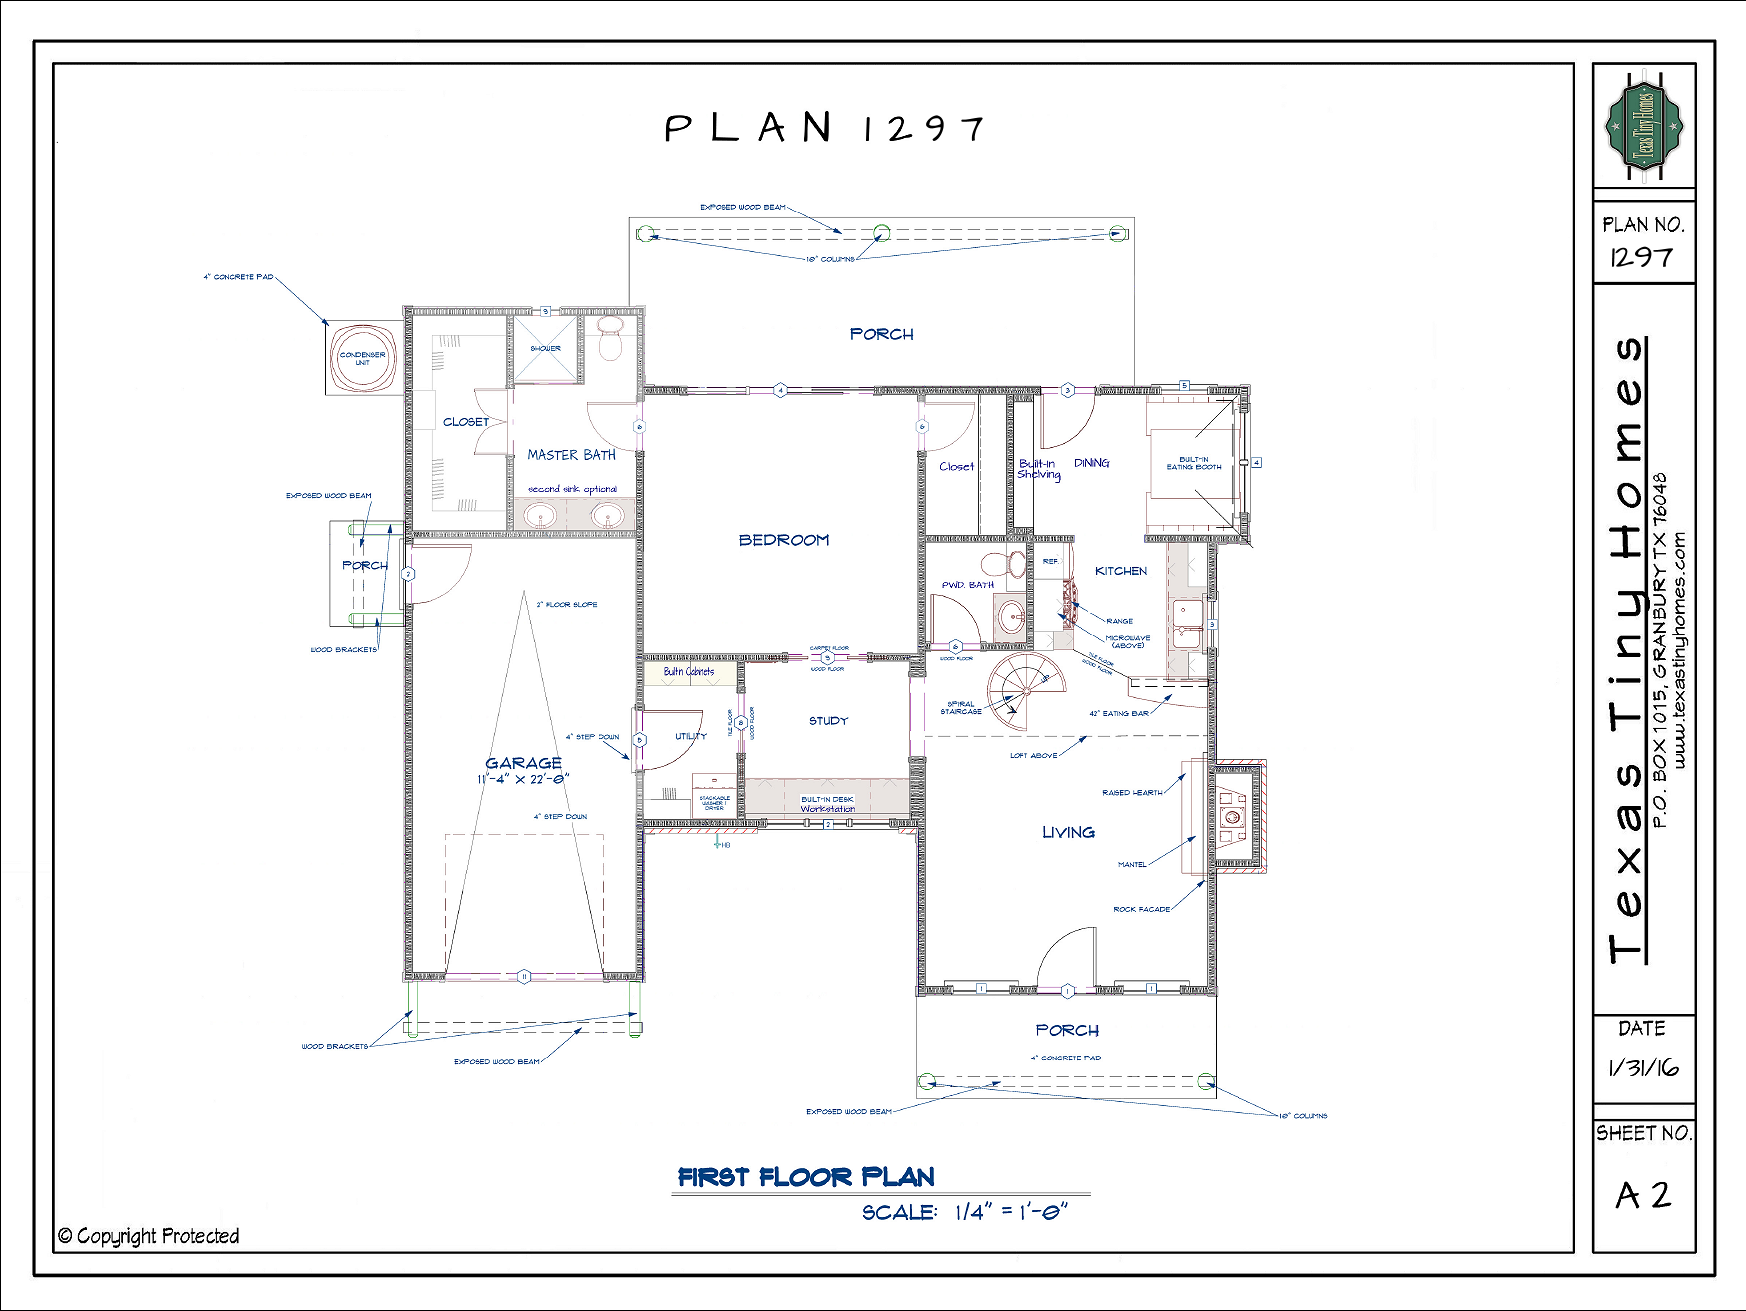 Small House Plans, Small Home Plans, Tiny Home Plans, Small Houses, Small Homes, Small Homes Builder, Small House Plans Texas